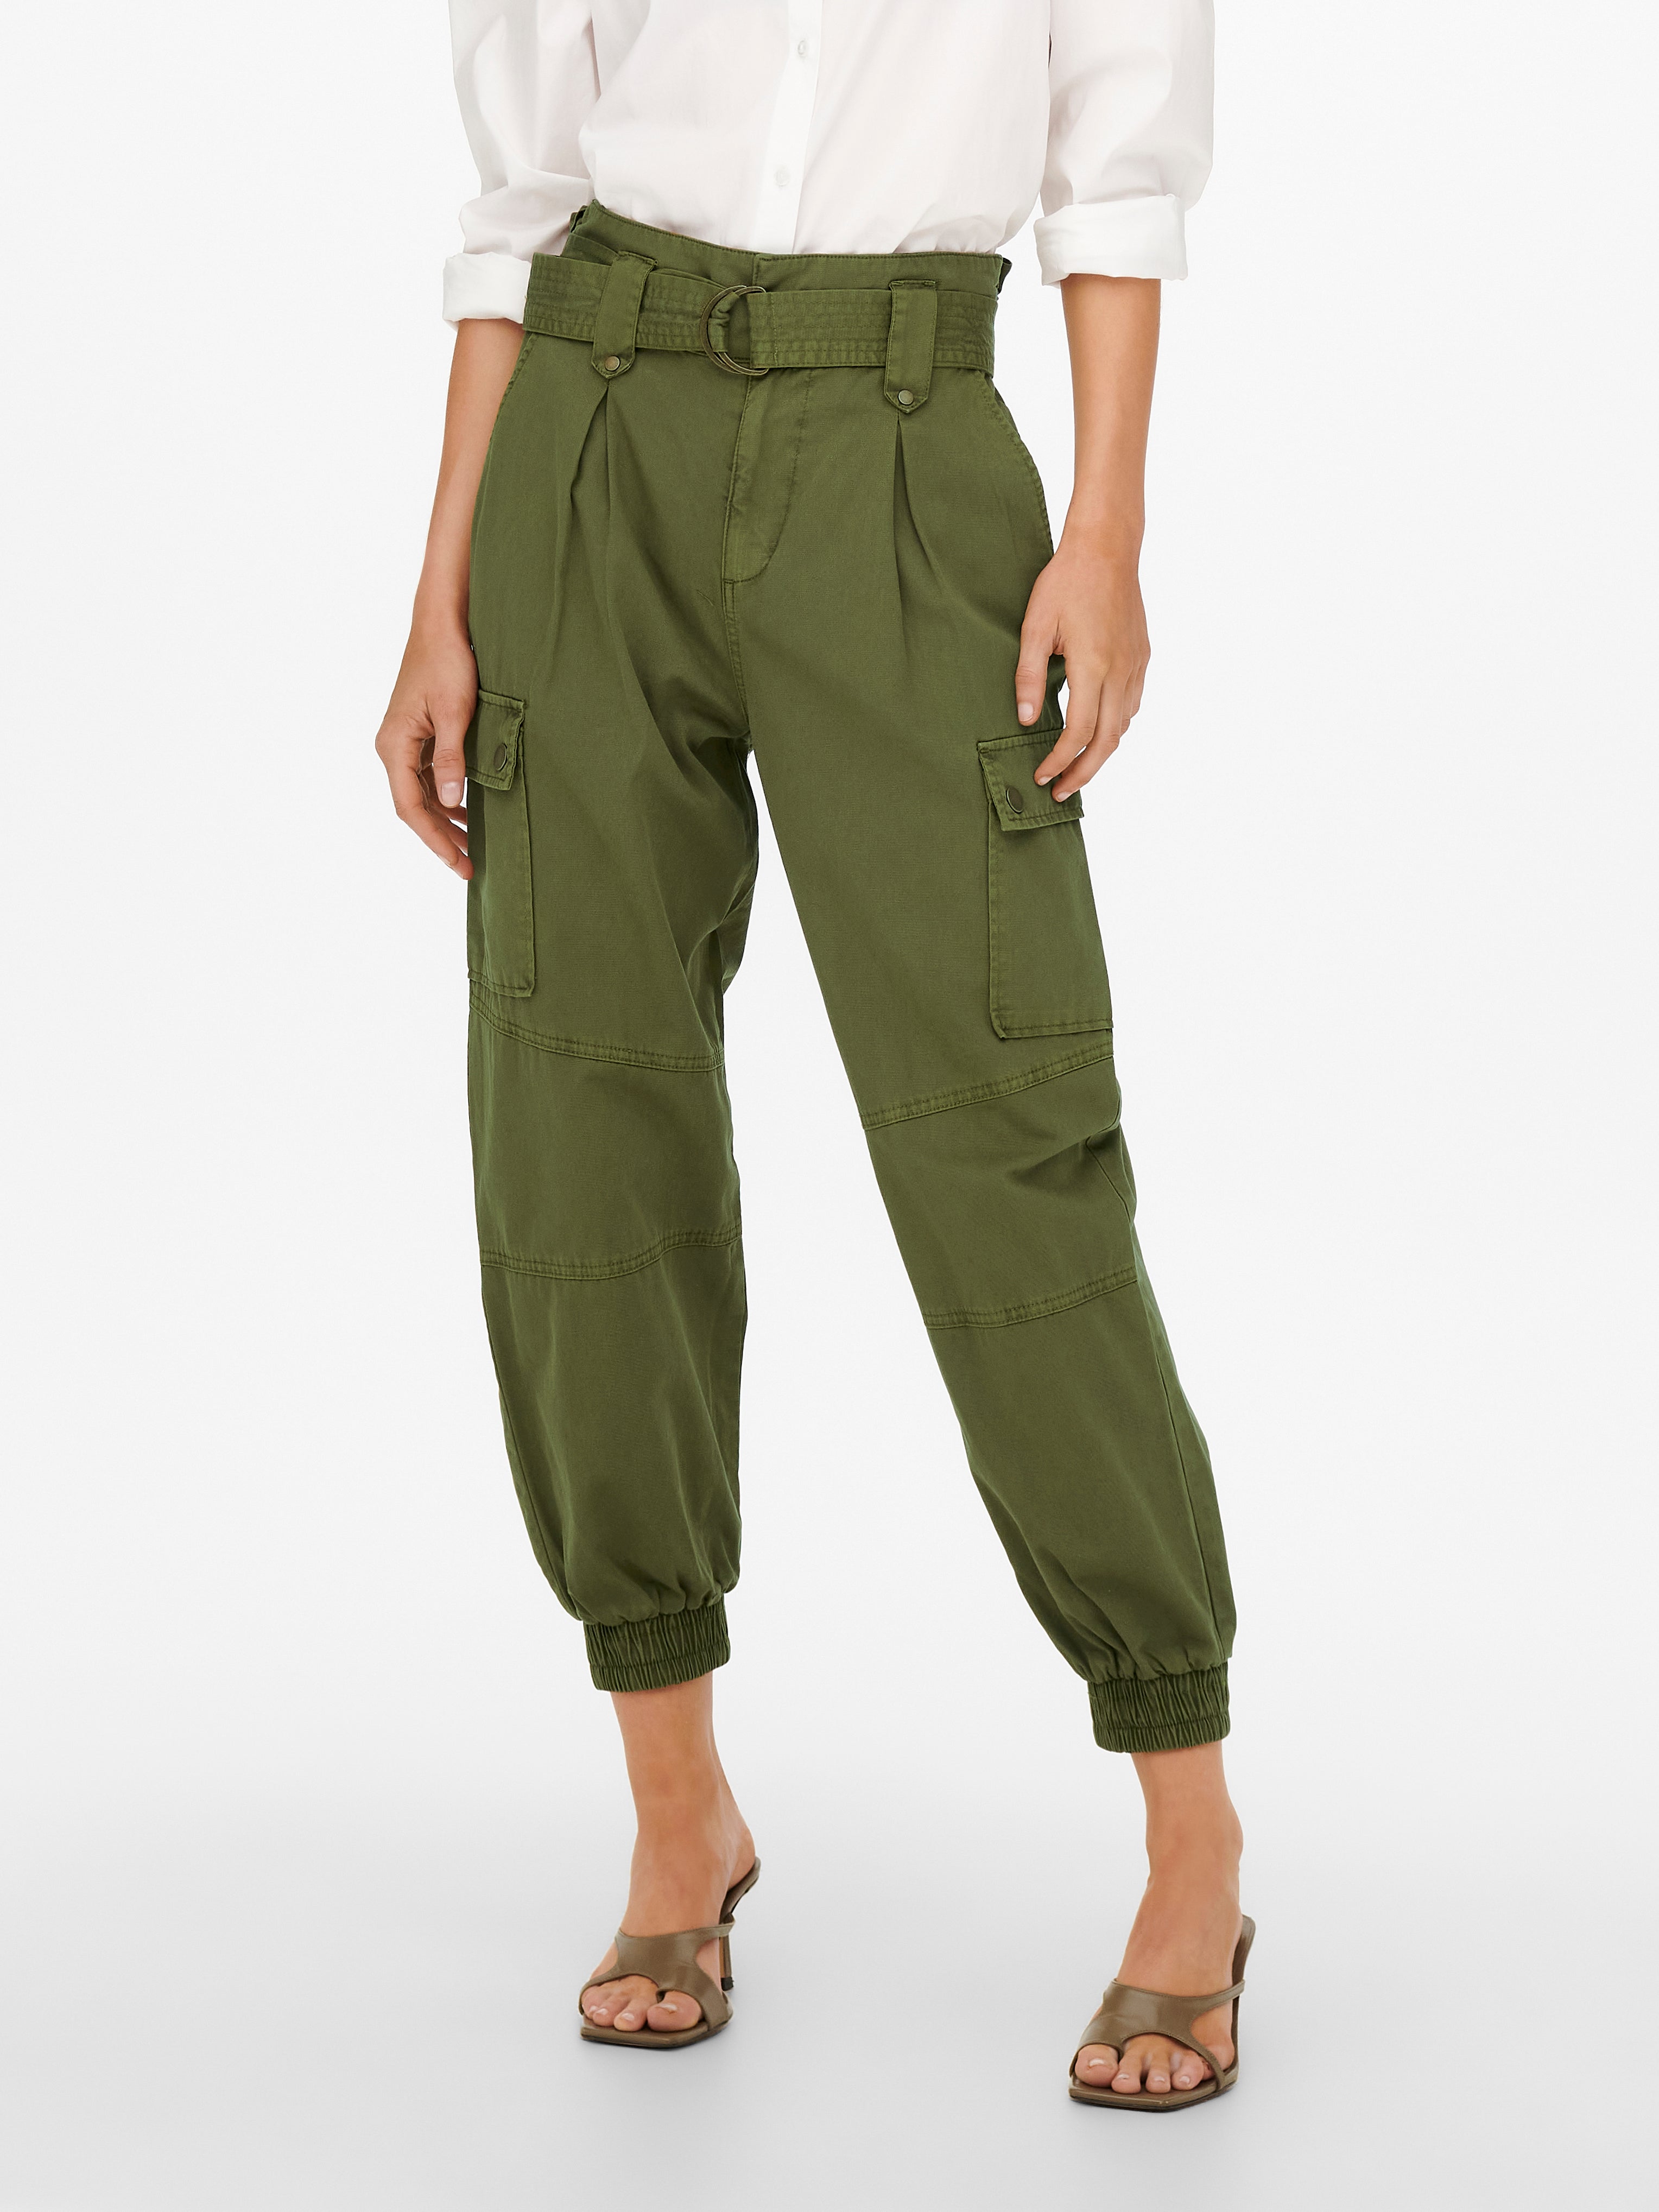 Wasted Youth CARGO PANTS OLIVE DRAB XL-